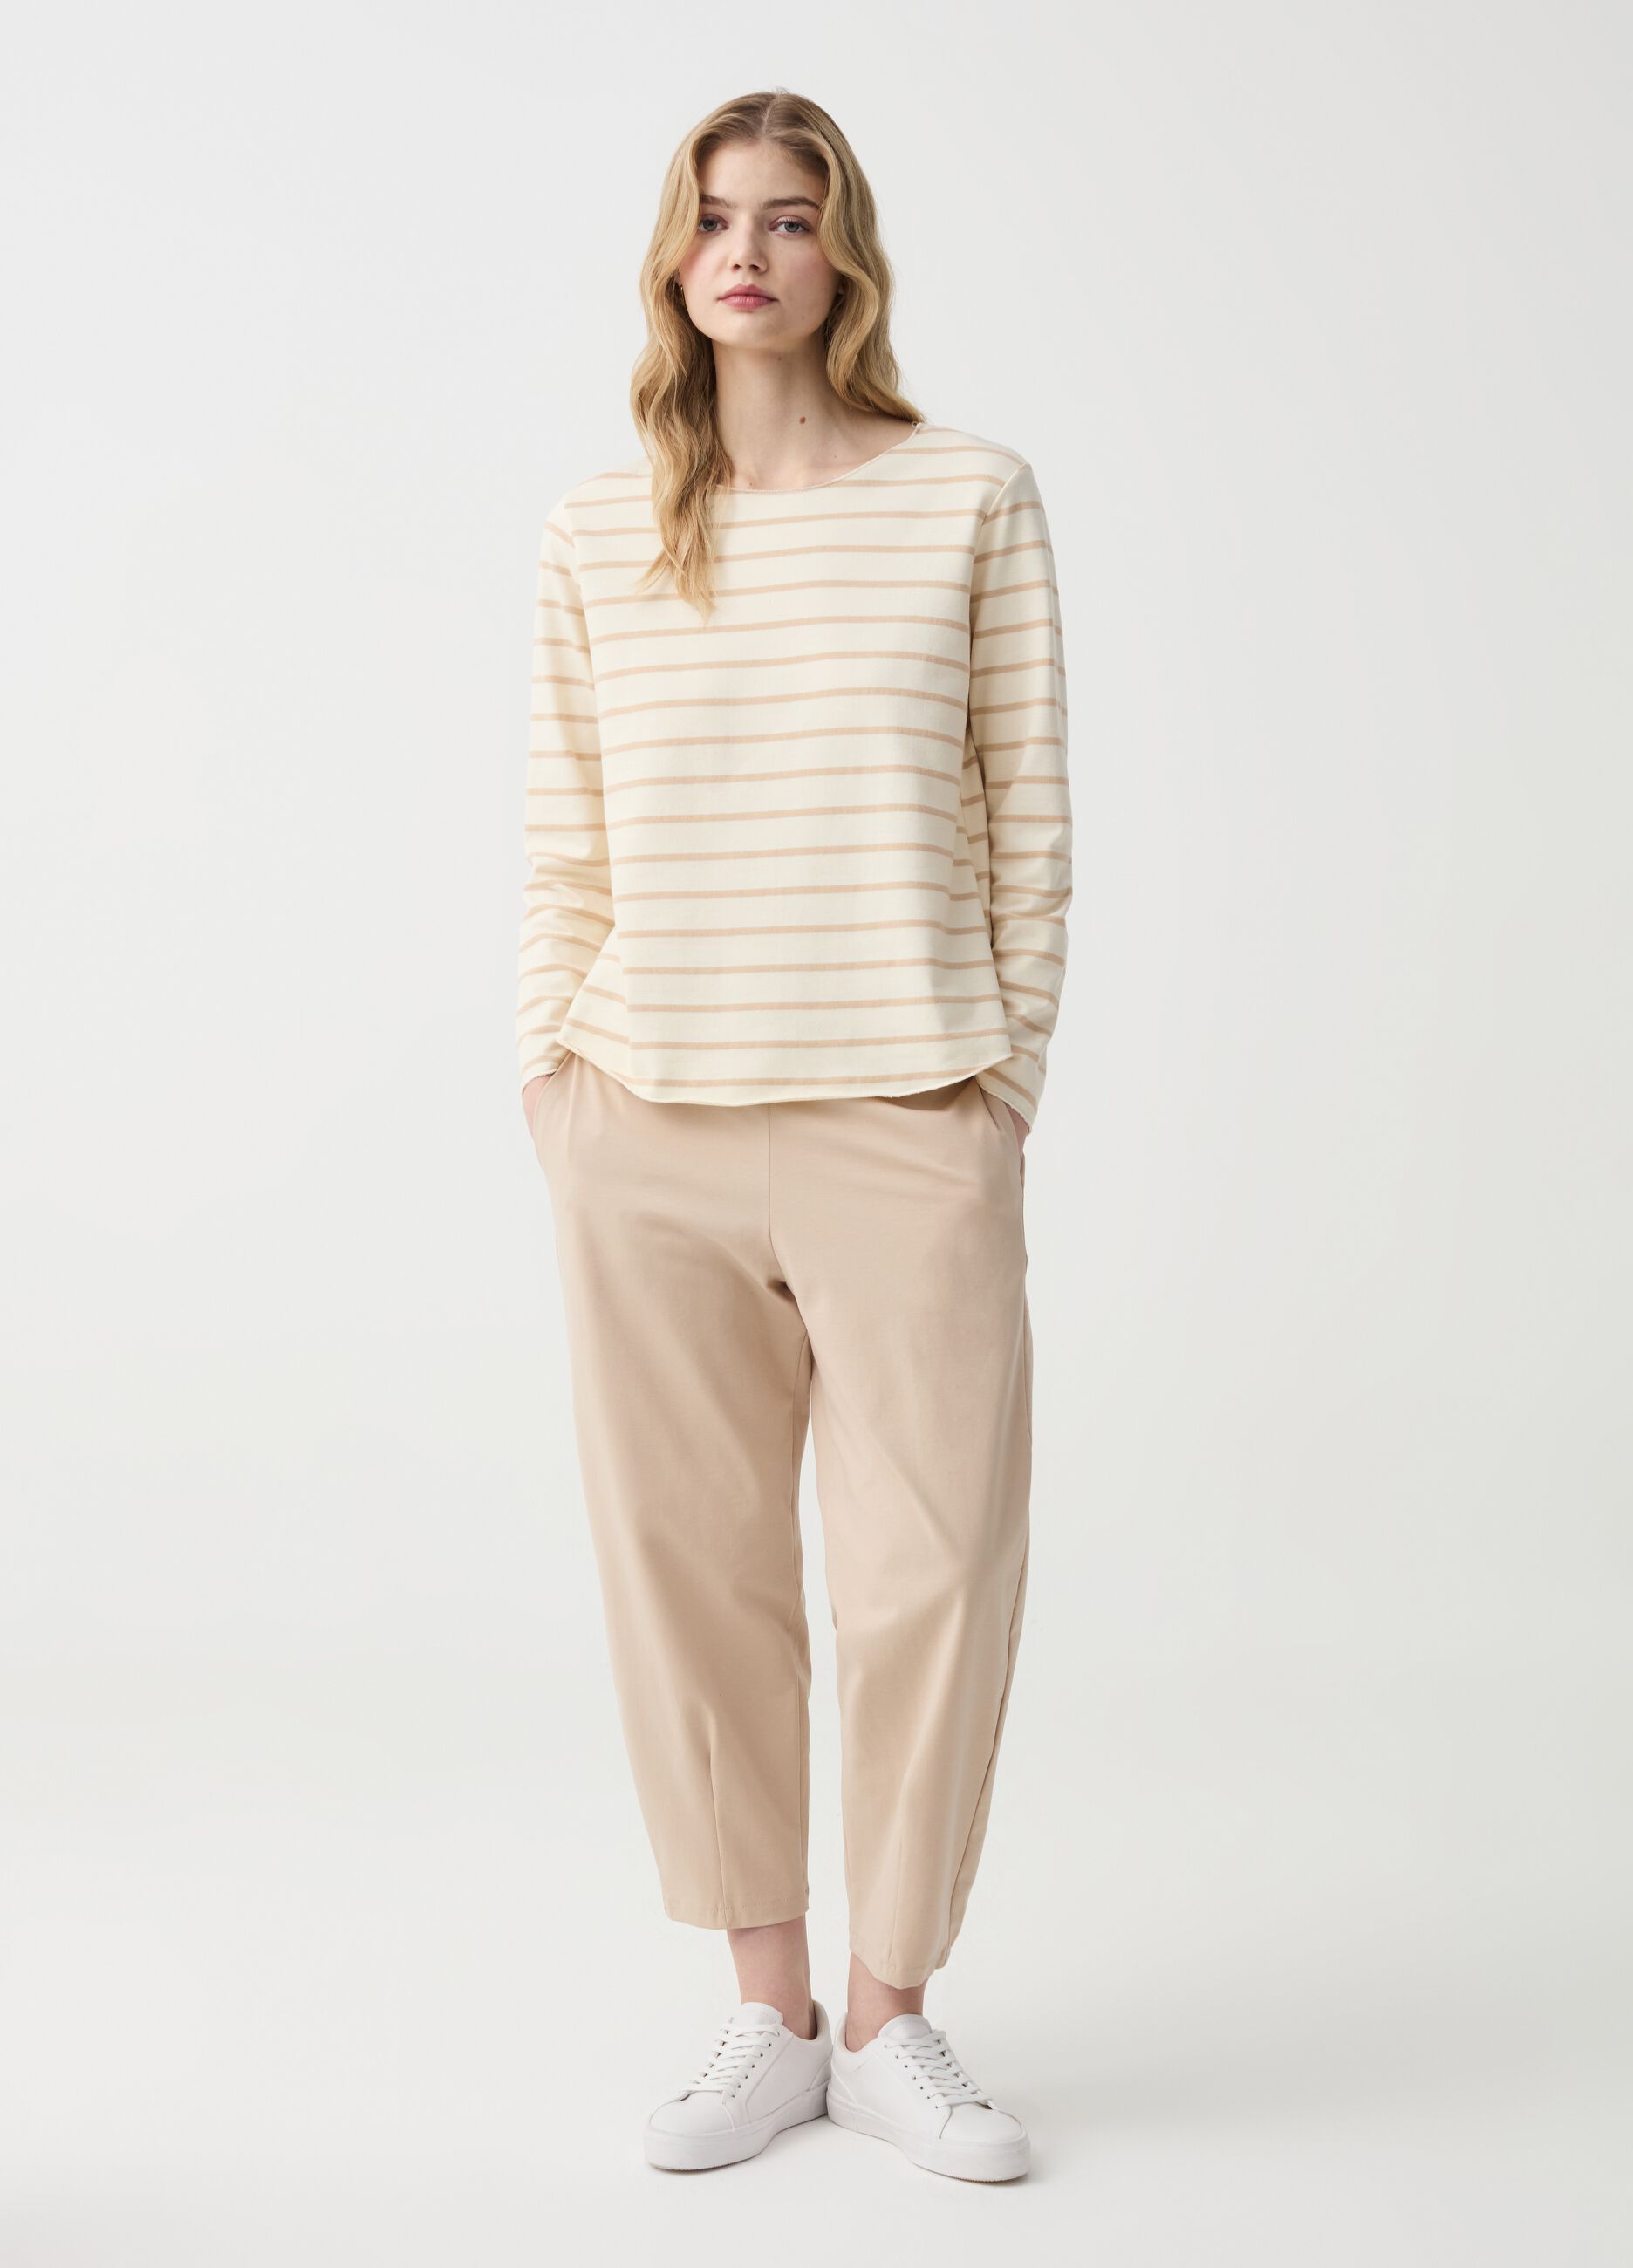 Pantalone cropped carrot fit